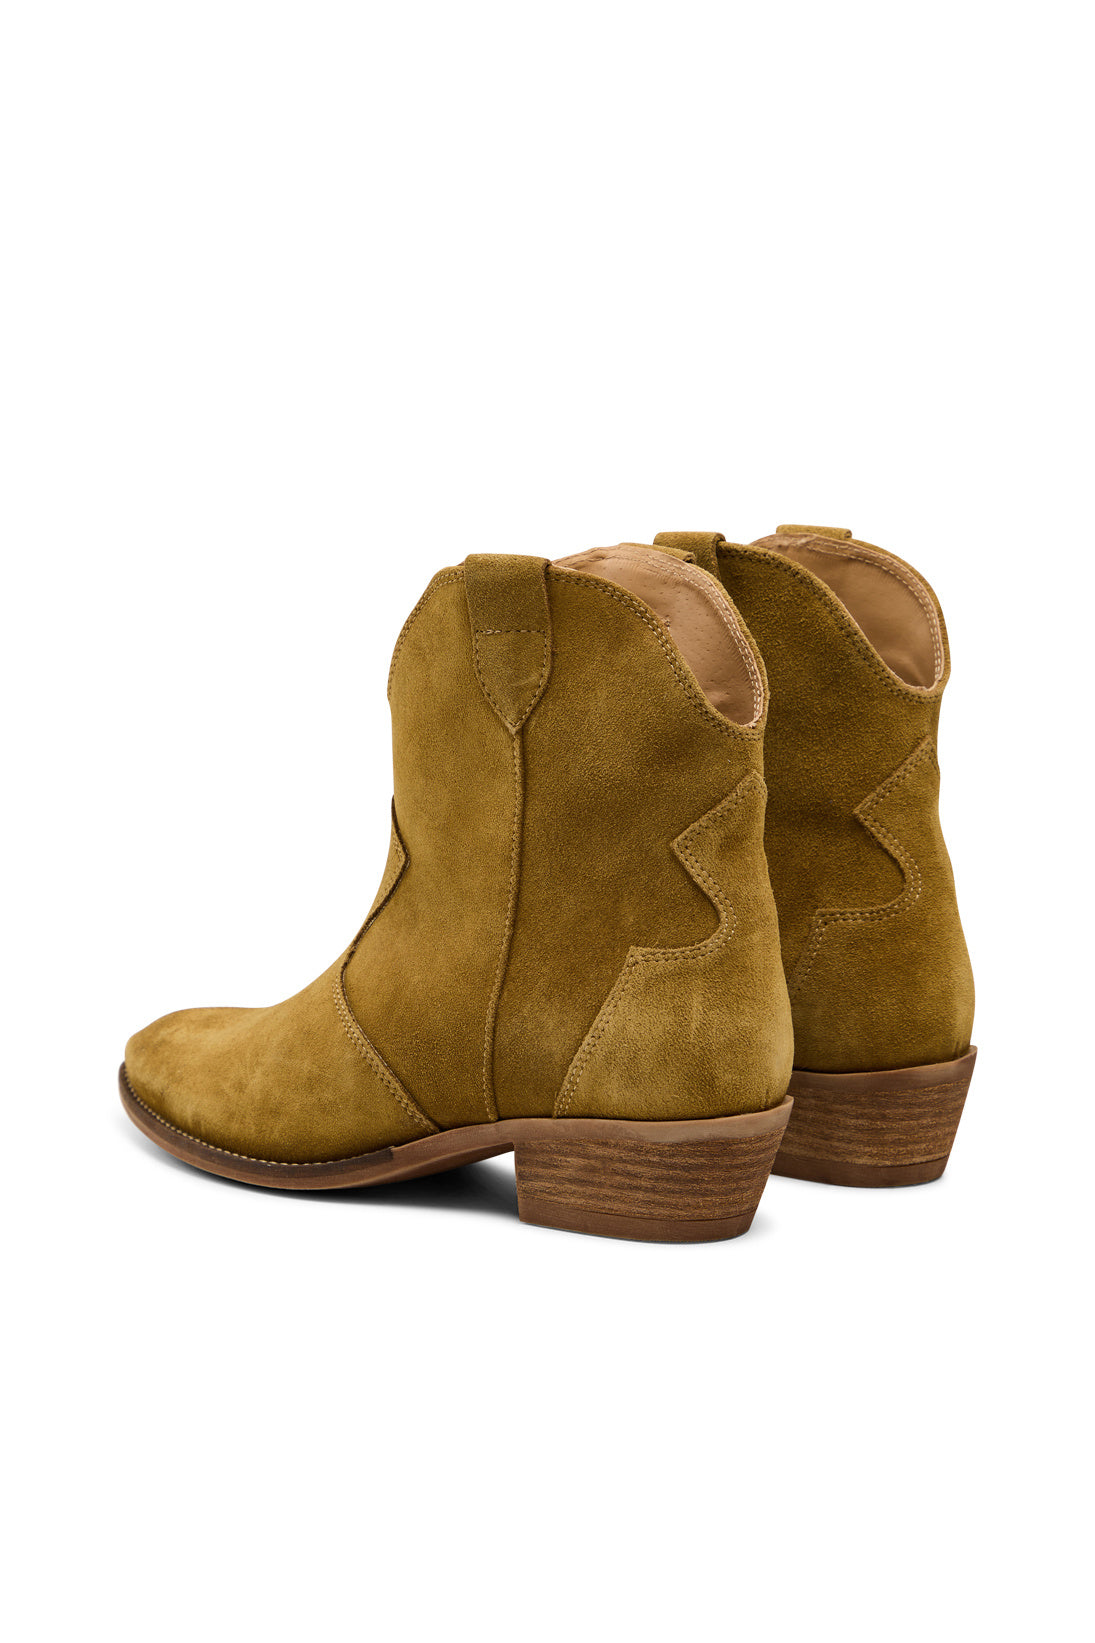 Pavement Clarice Leather Boot - Khaki Suede - RUM Amsterdam